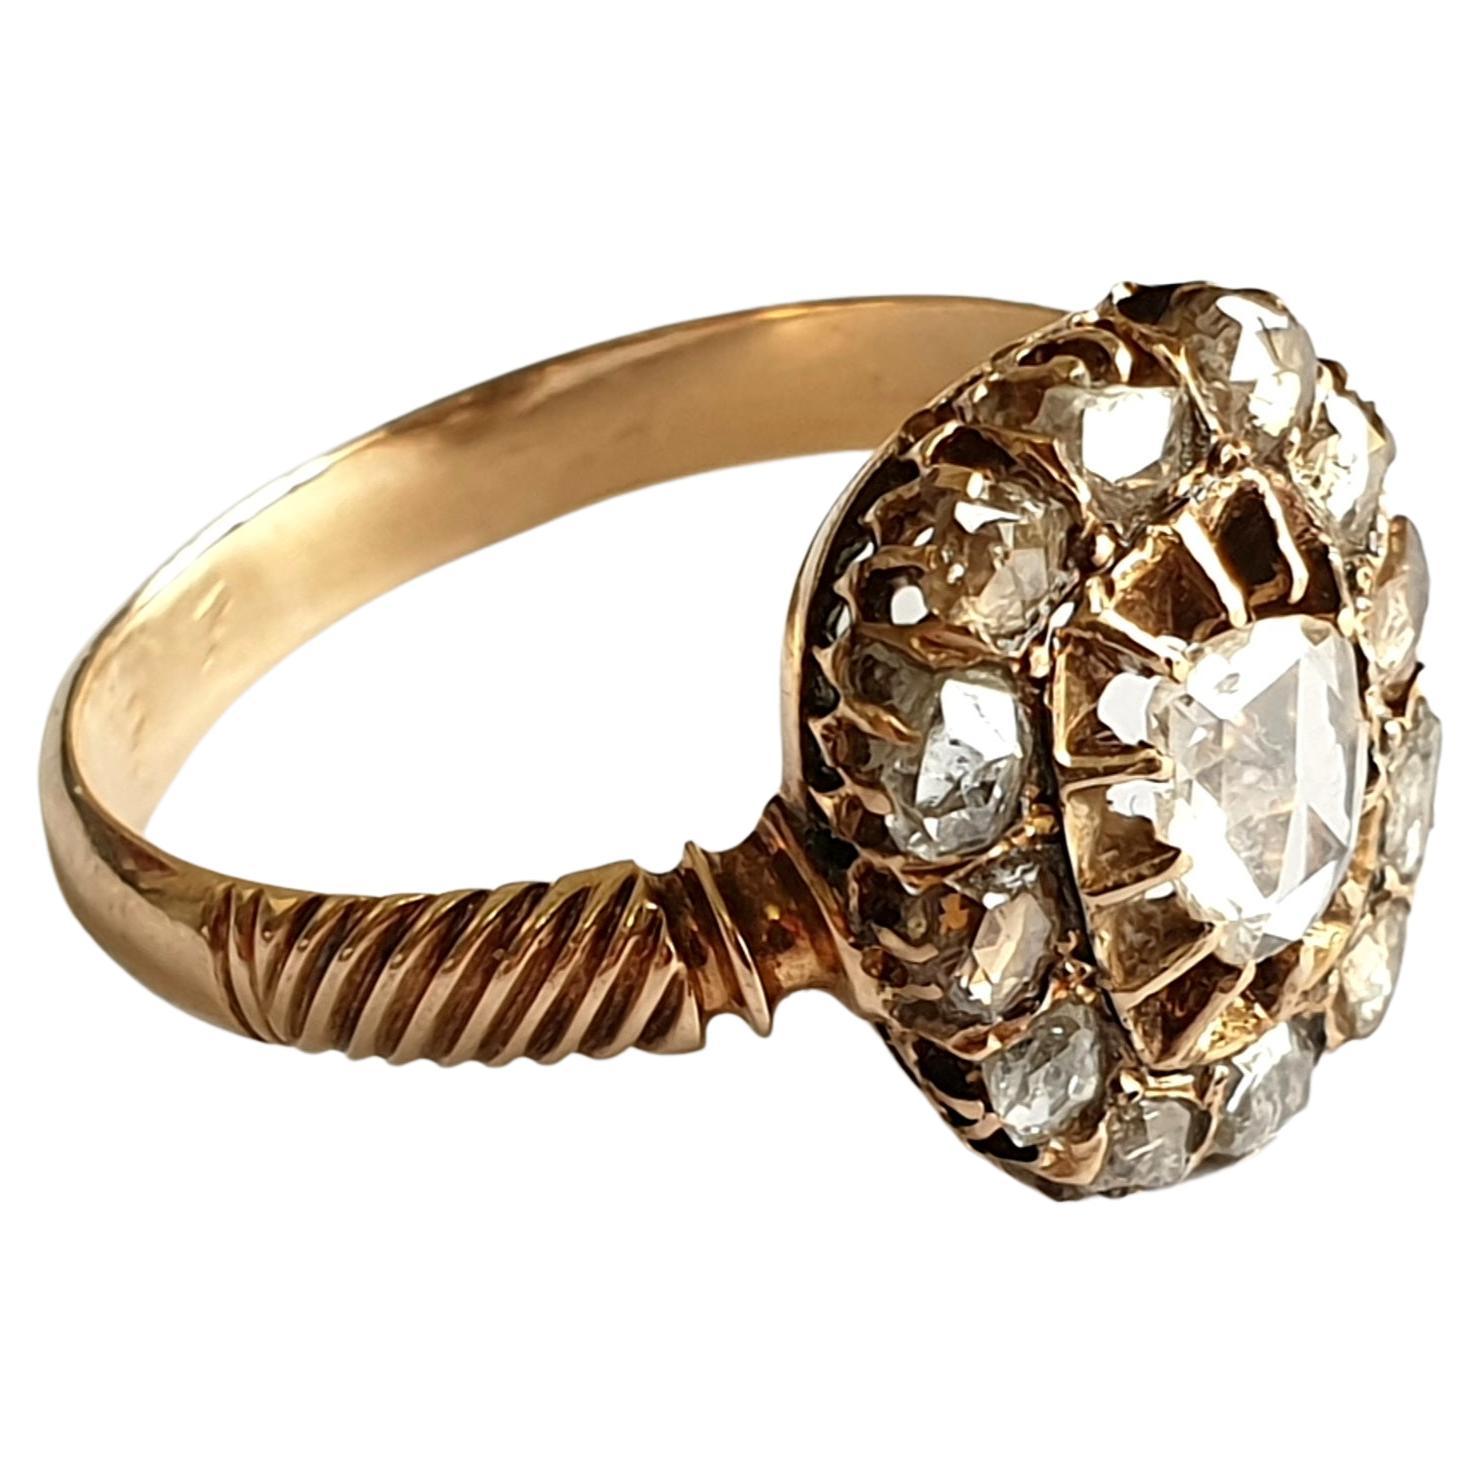 Antique Russian rose cut diamond 14k gold ring centered with single cut rose diamond flanked with several small rose cut diamonds with an estimate diamond weight of 1.5 carats with detailed work on ring band sides hall marked 56 imperial Russian